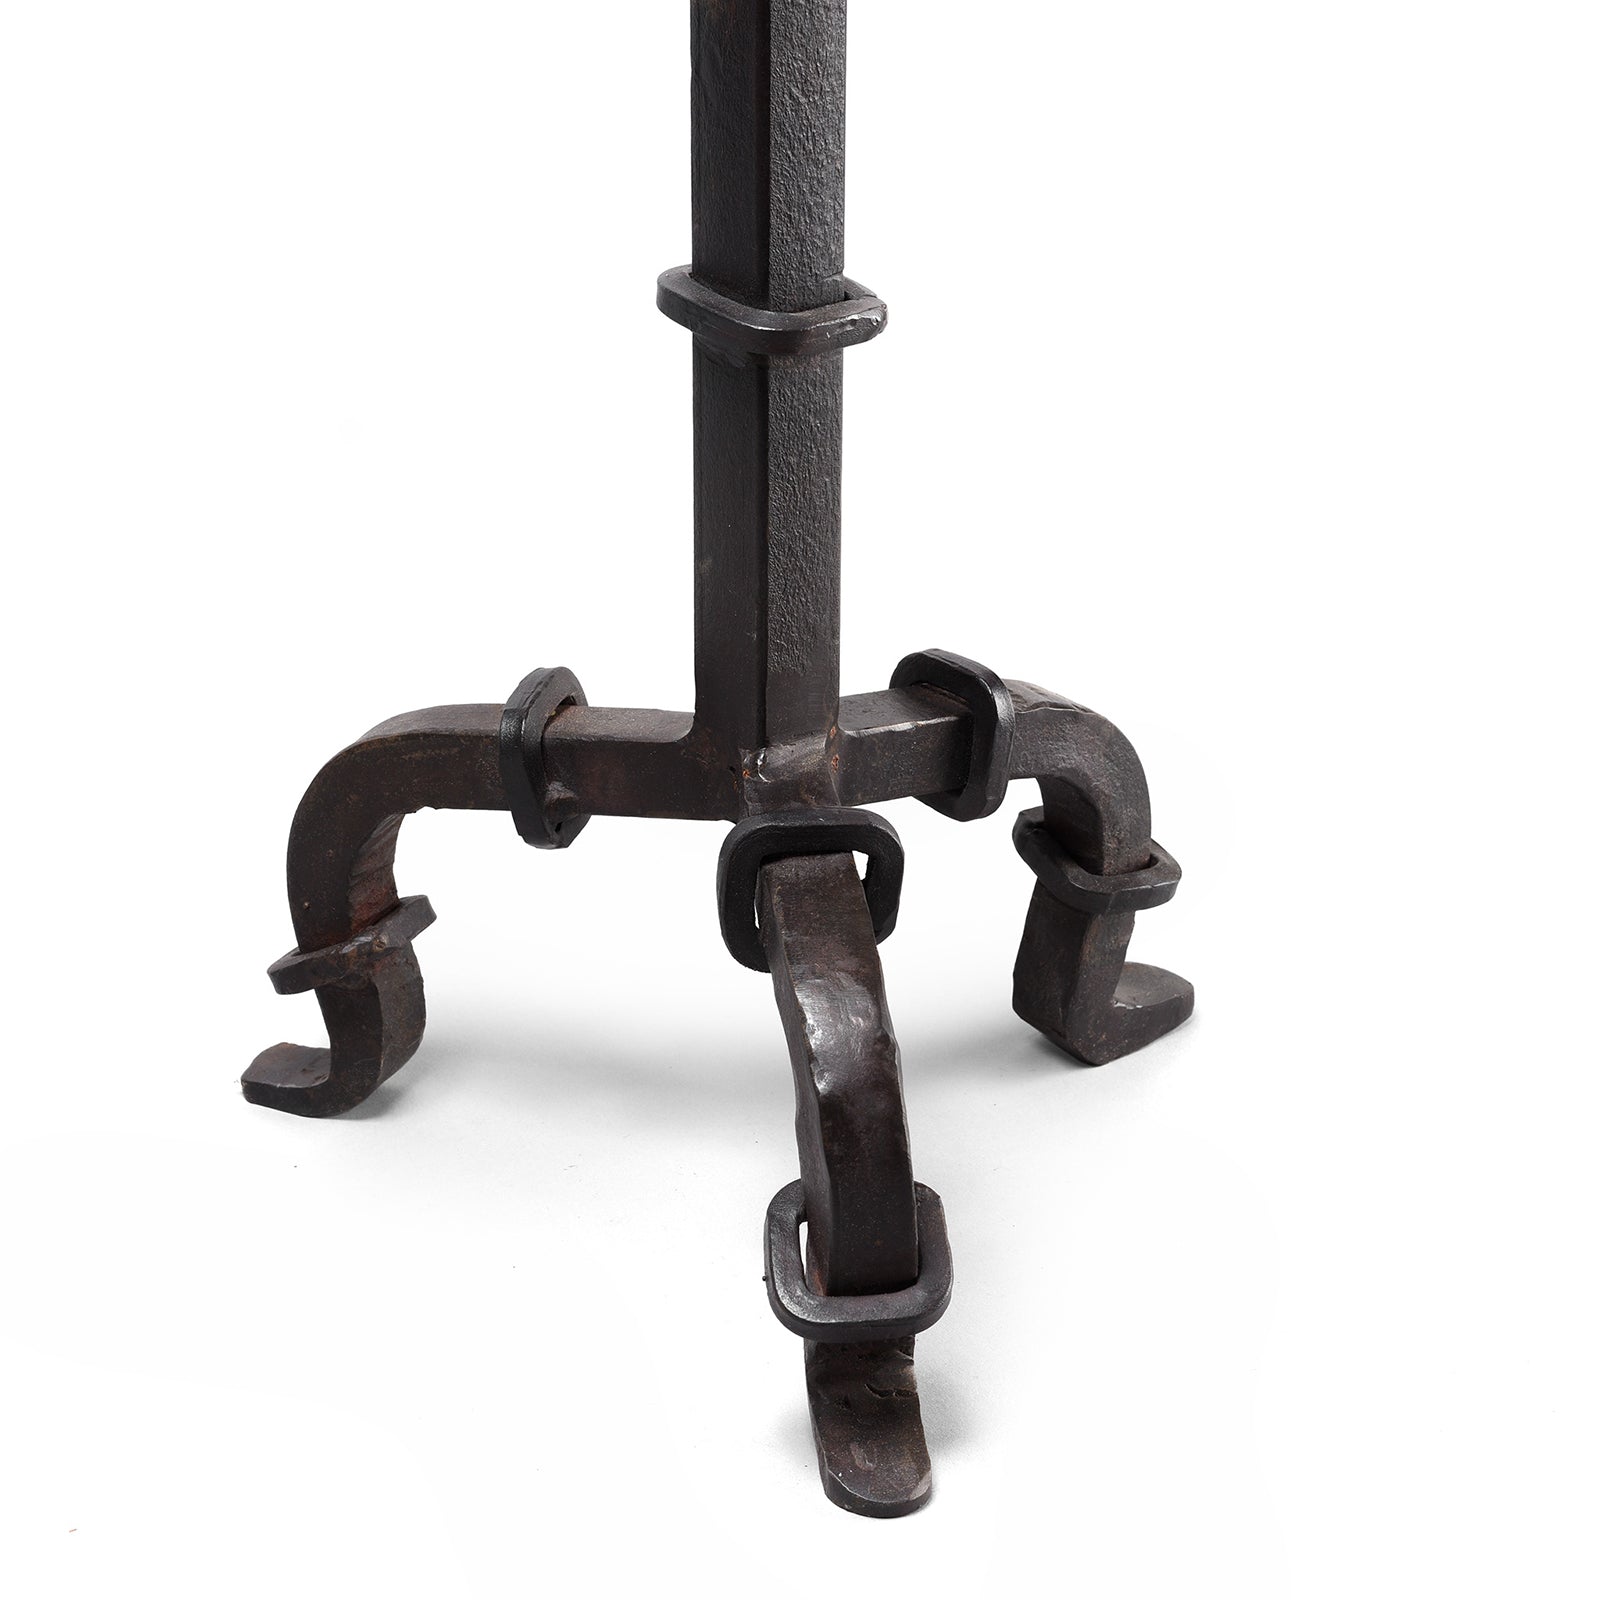 Rustic Industrial Hand Wrought Iron Candlestick & Candle Stand from India | Indigo Antiques